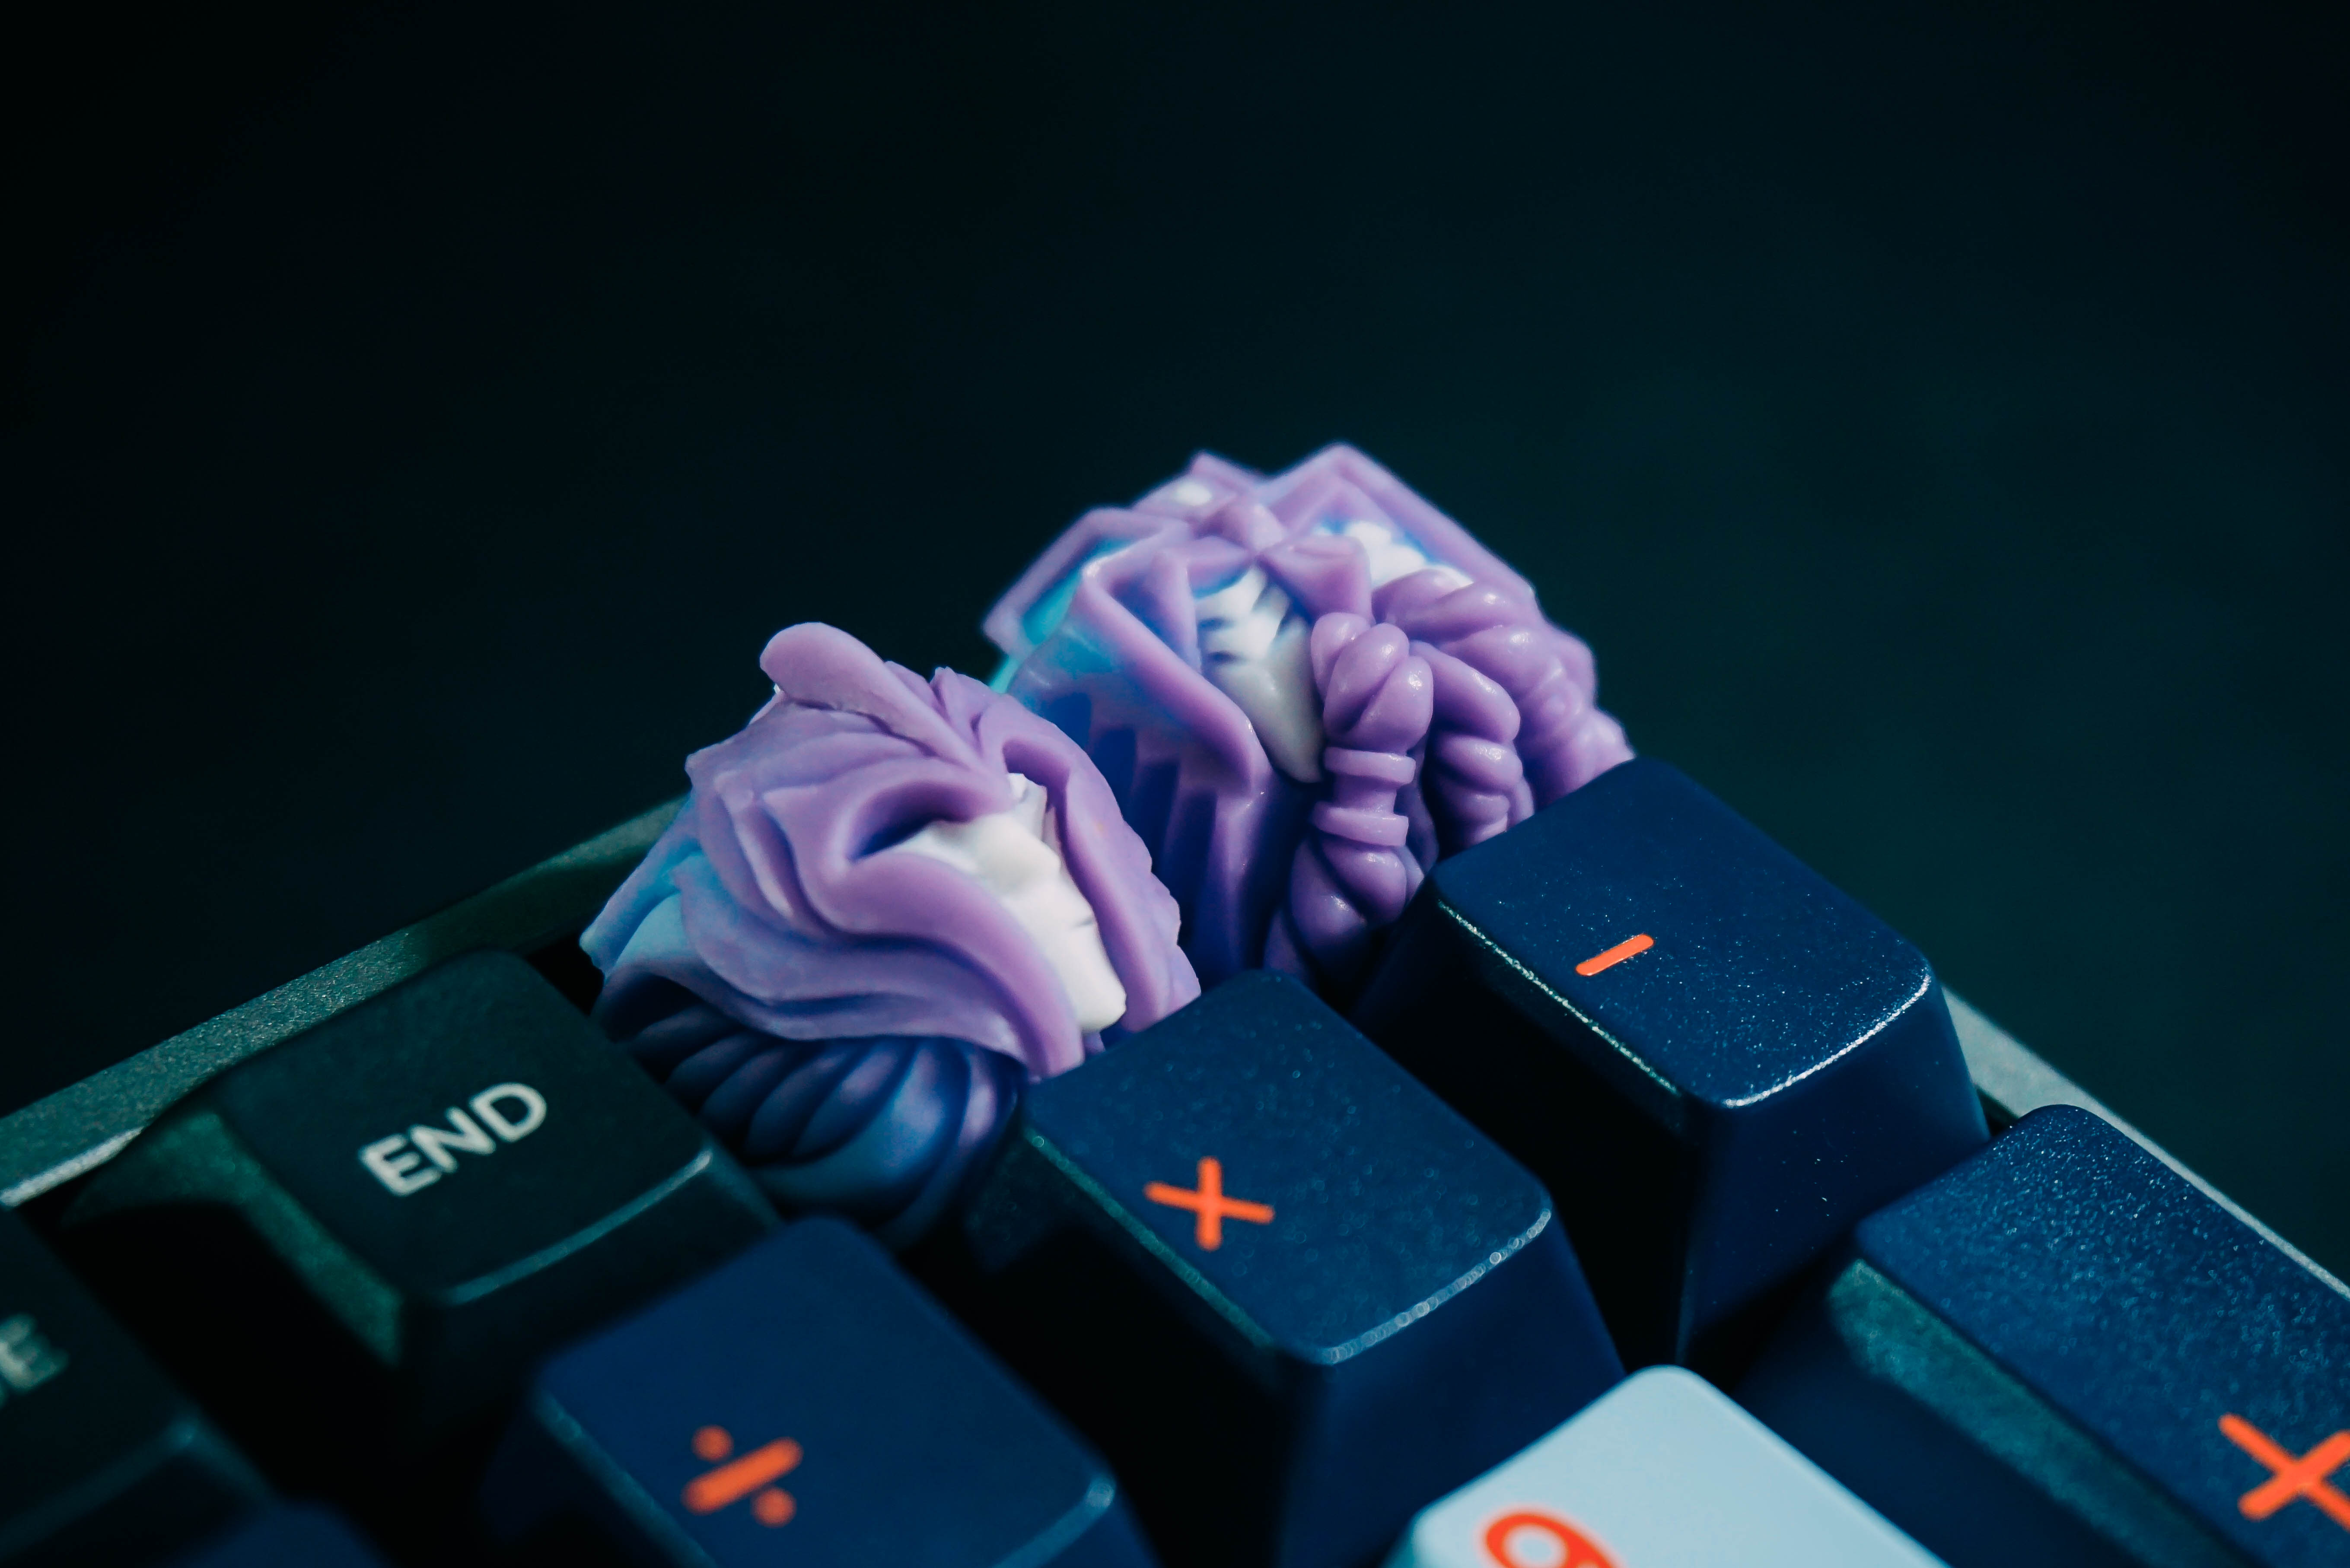 Our first Artisan keycap !